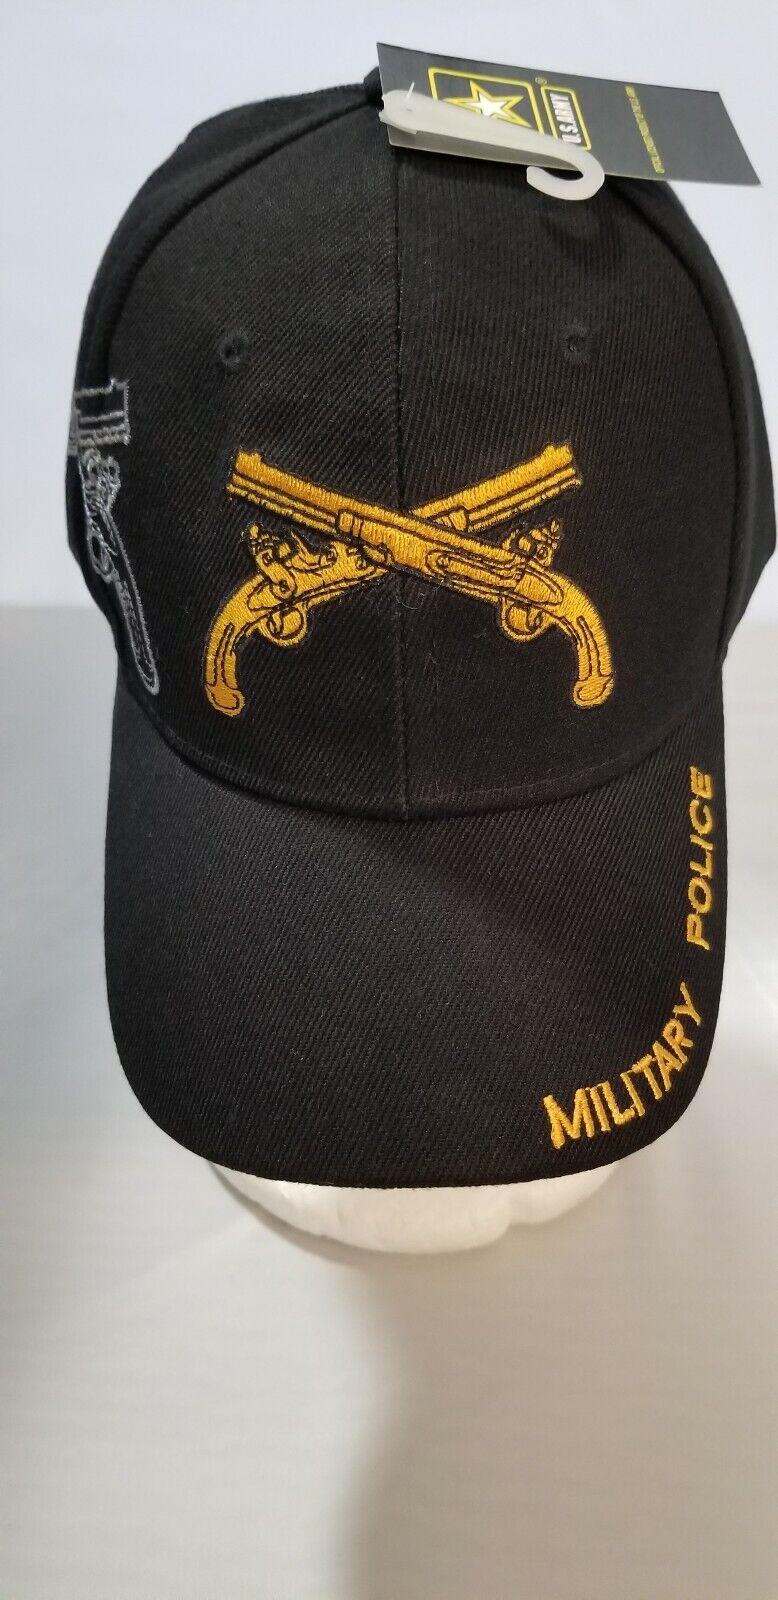 New Black License US Army Military Police Hat Ball Cap Cross Guns Free Shipping